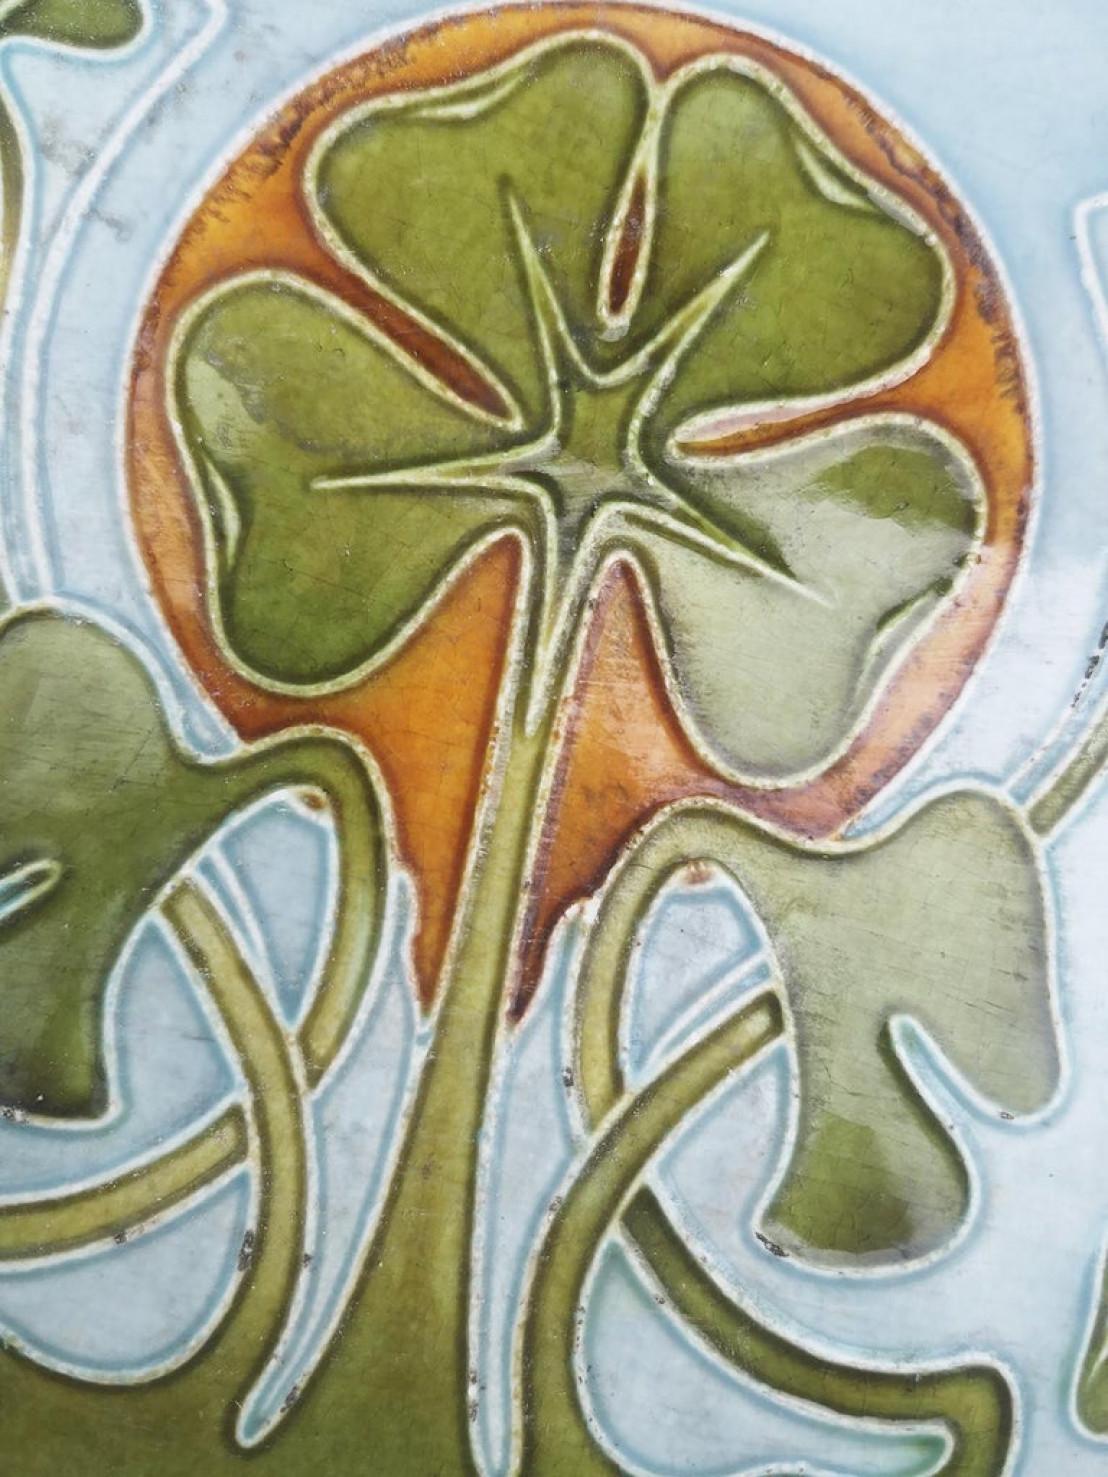 This is an amazing set of antique Art Nouveau handmade tiles 1920s.
A beautiful relief and deep green, and brown color and light blue and white back ground. These tiles would be charming displayed on easels, framed or incorporated into a custom tile